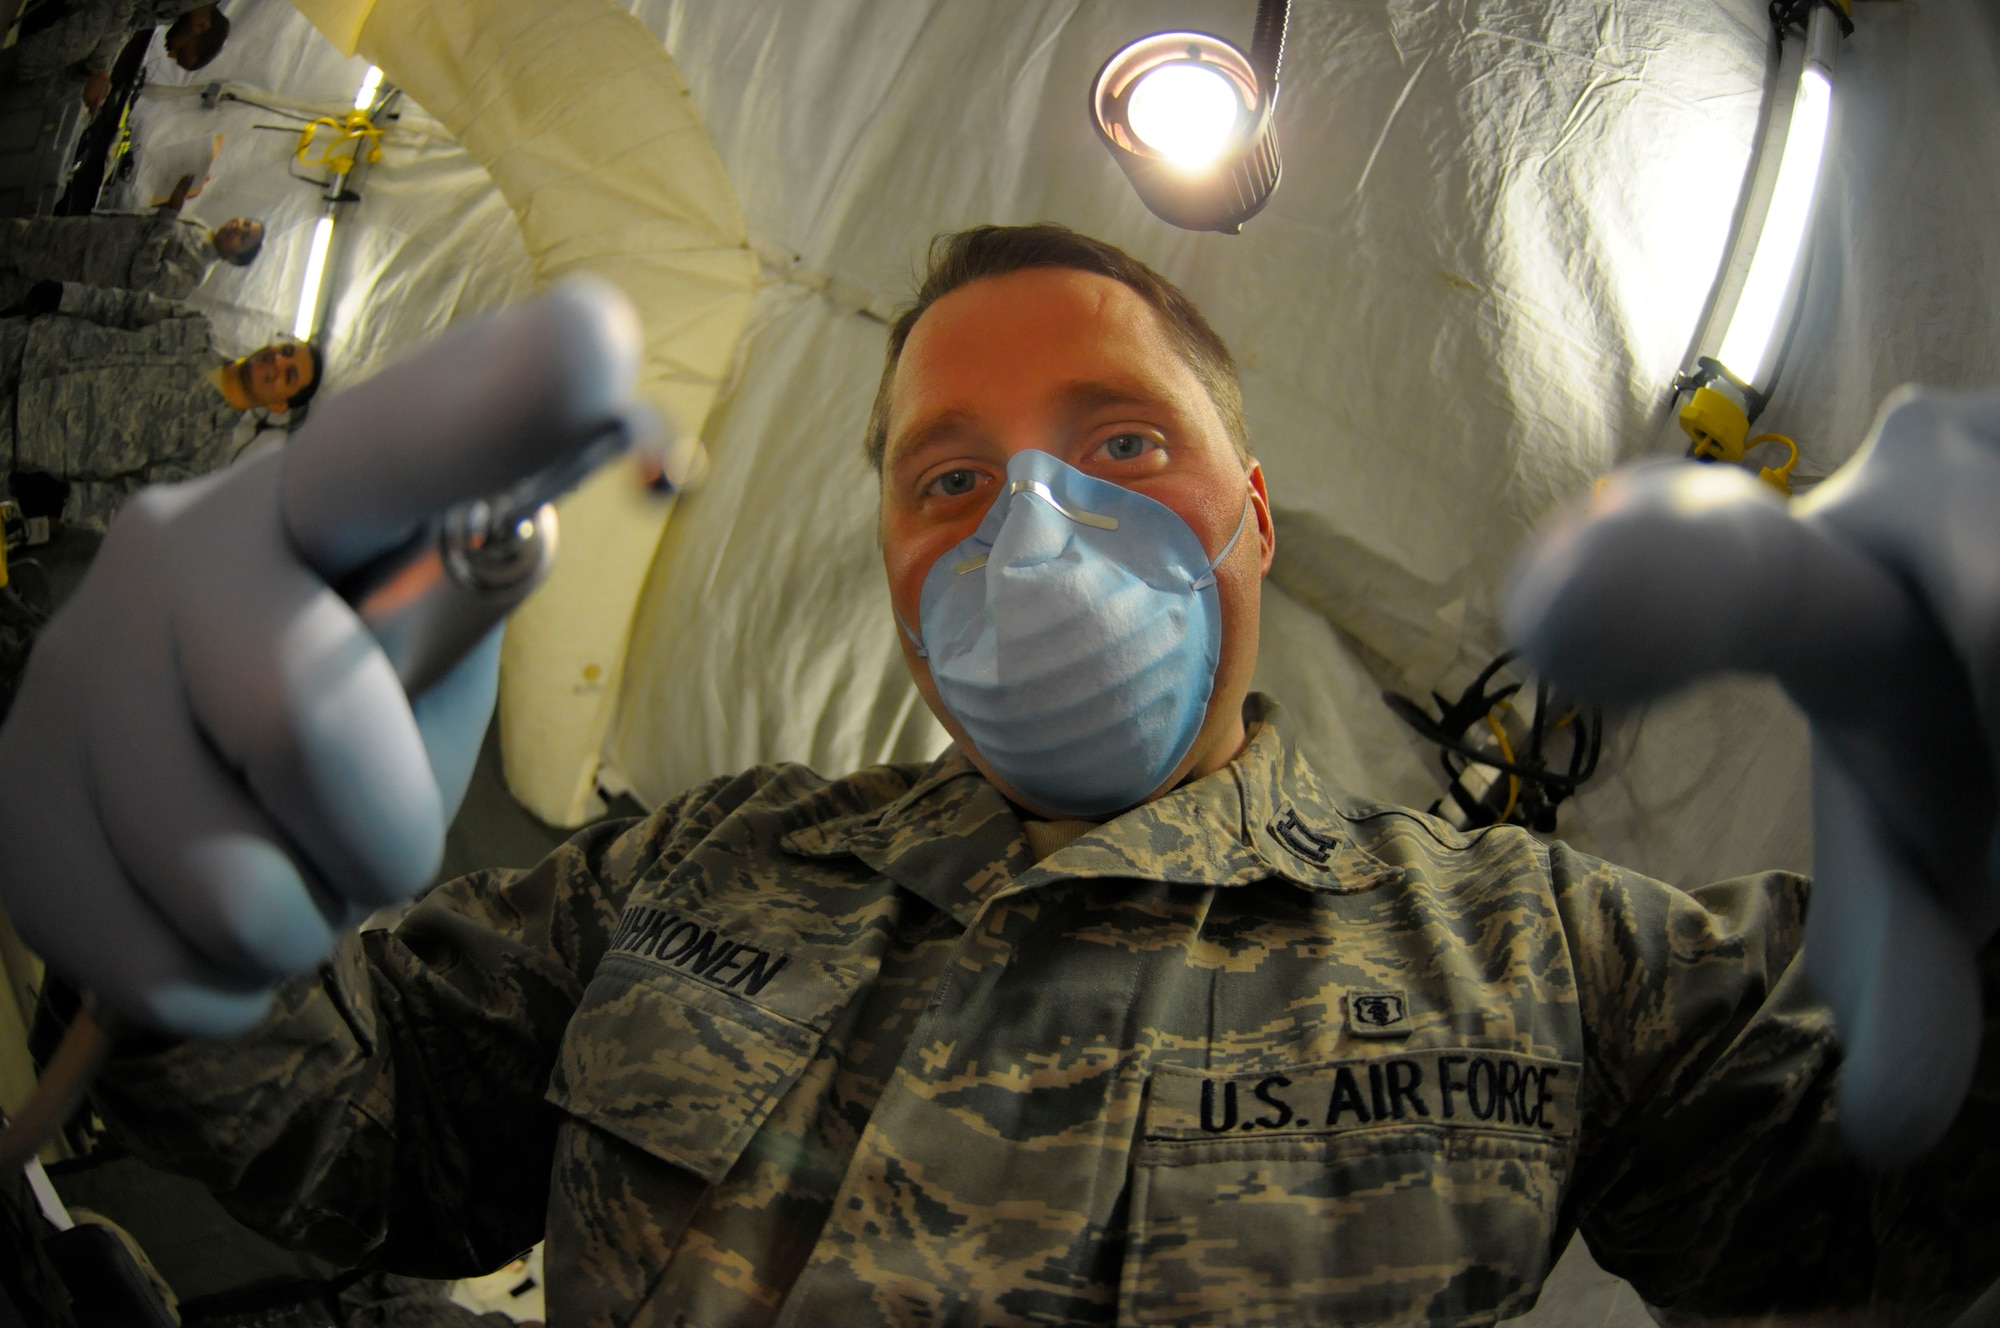 Capt. Rian Suihkonen, 86th Dental Squadron dentist, prepares to examine the mouth of his patient during the Expeditionary Medical Support Exercise at Ramstein Air Base, Germany, Dec. 1, 2011. EMEDS is a week-long exercise for the 86th and 31st Medical Groups to hone their skills in a mock-deployed environment. (U.S. Air Force photo by Staff Sgt. Travis Edwards)